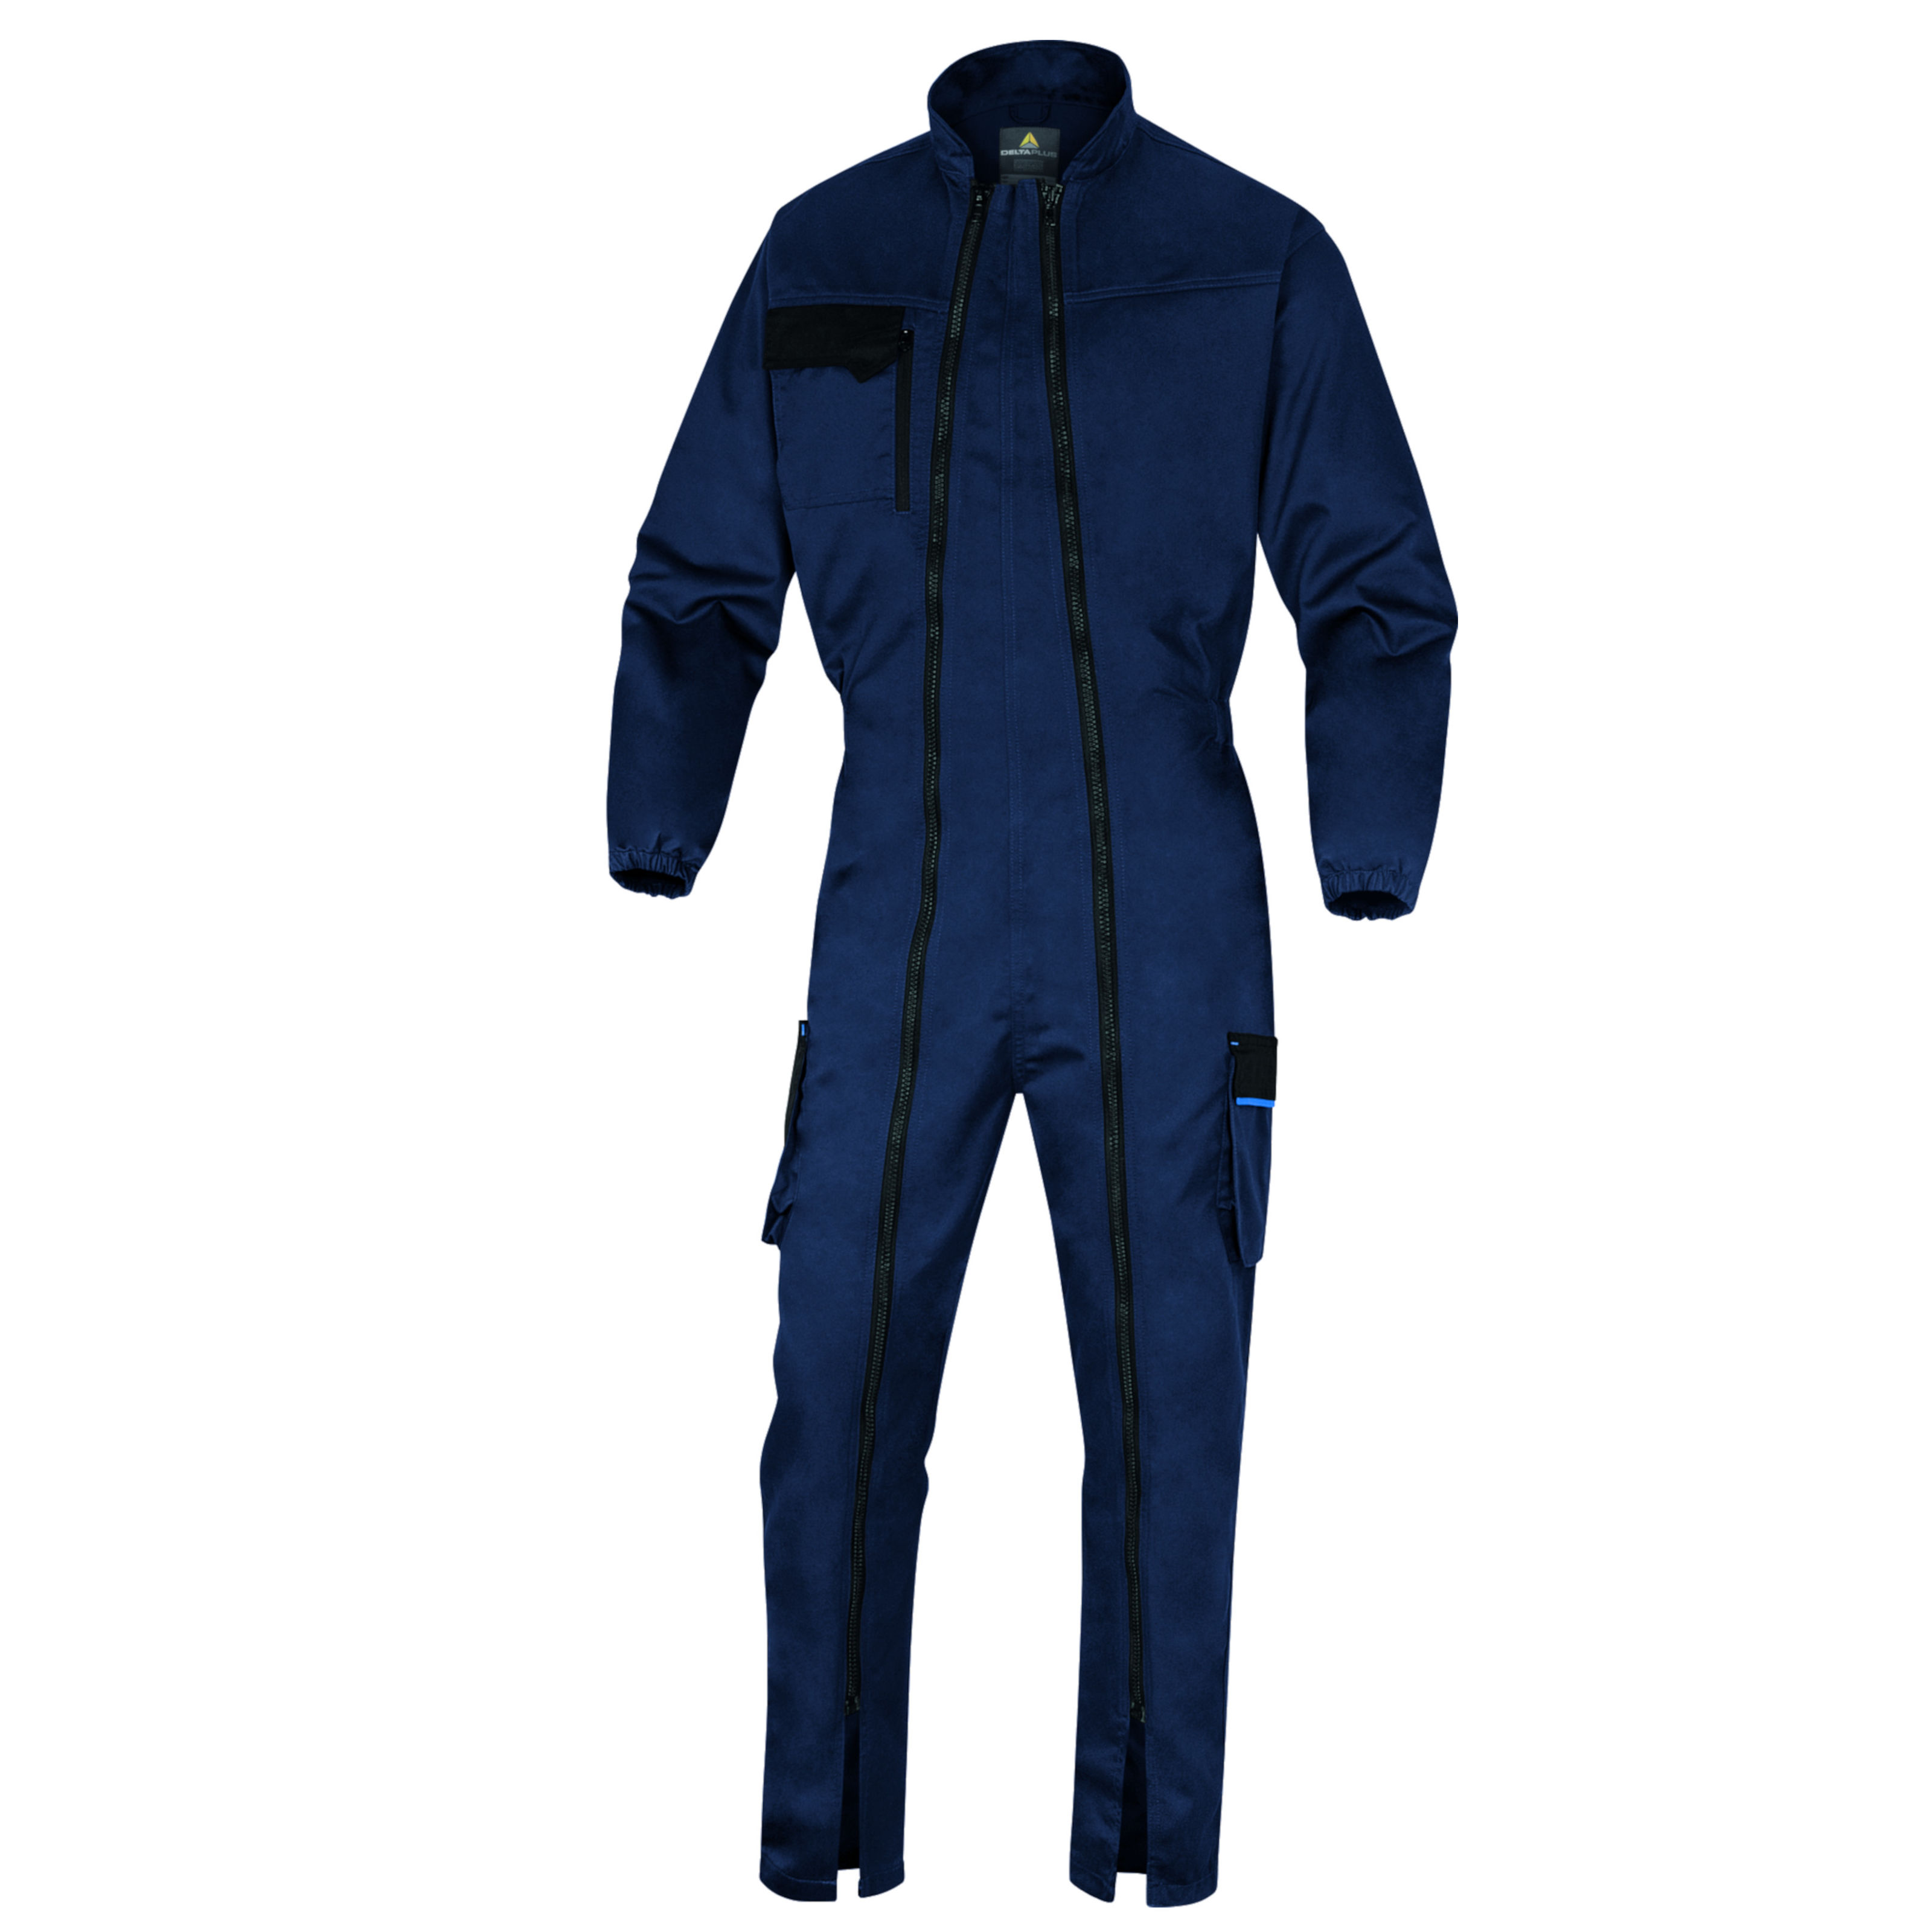 Delta Plus Panoply MCCOM Mach2 Corporate Blue Work Overalls Coveralls Boilersuit 